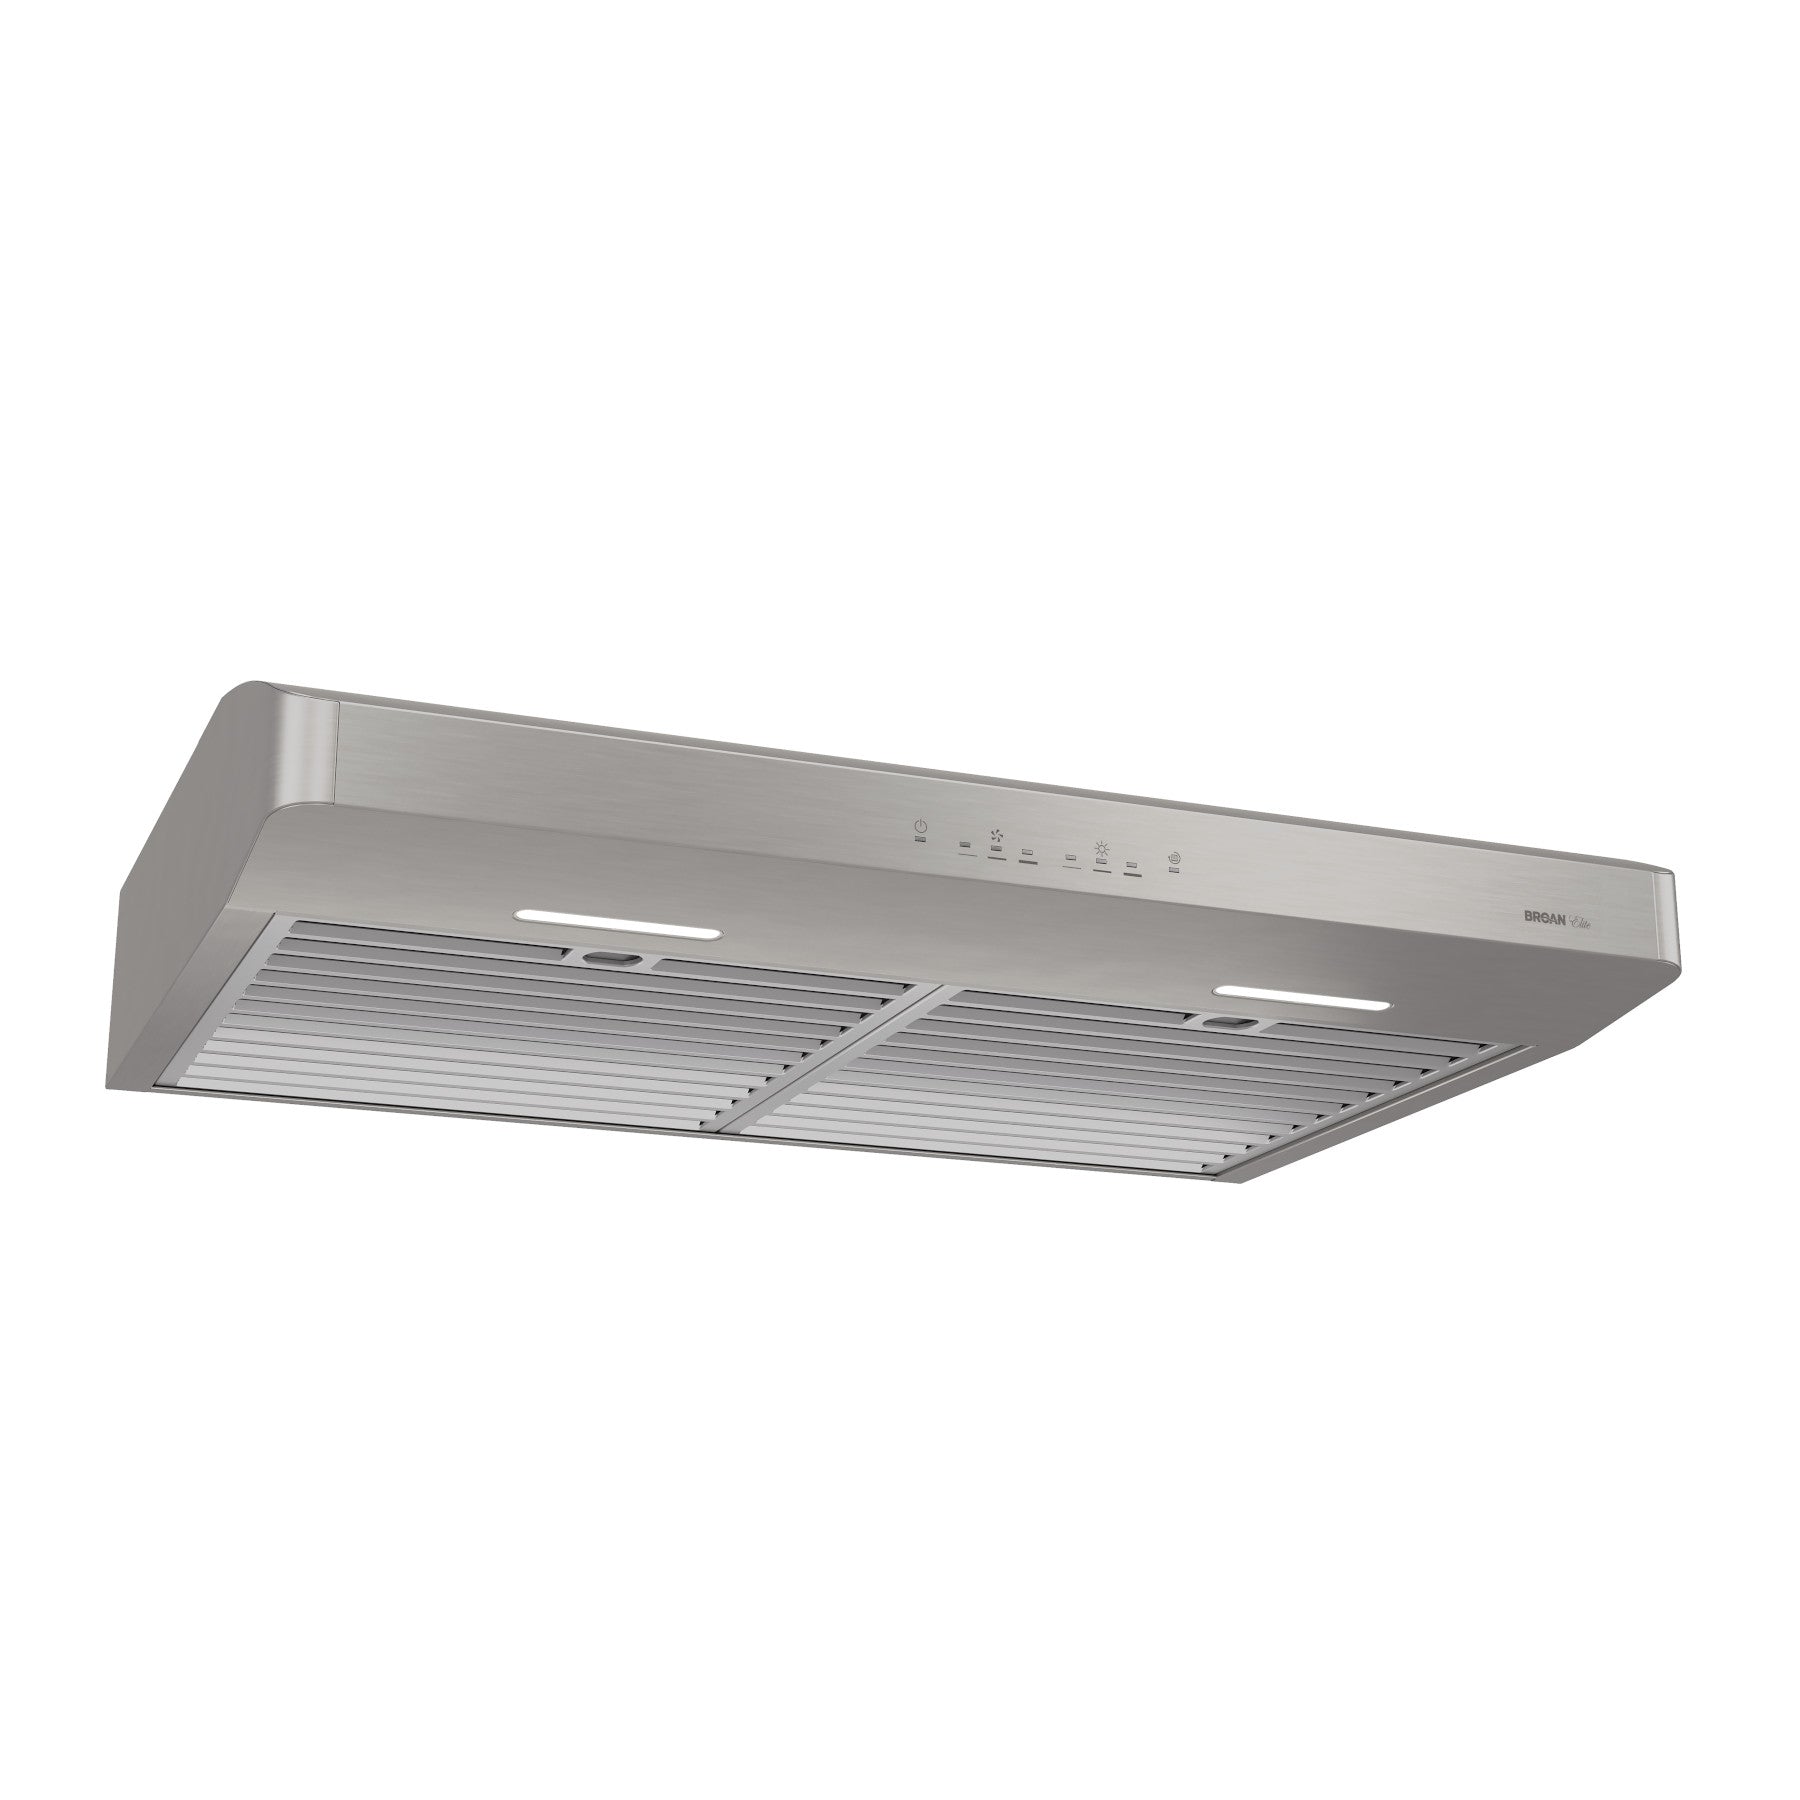 Broan - 36 Inch 650 CFM Under Cabinet Range Vent in Stainless - ERLE136SS